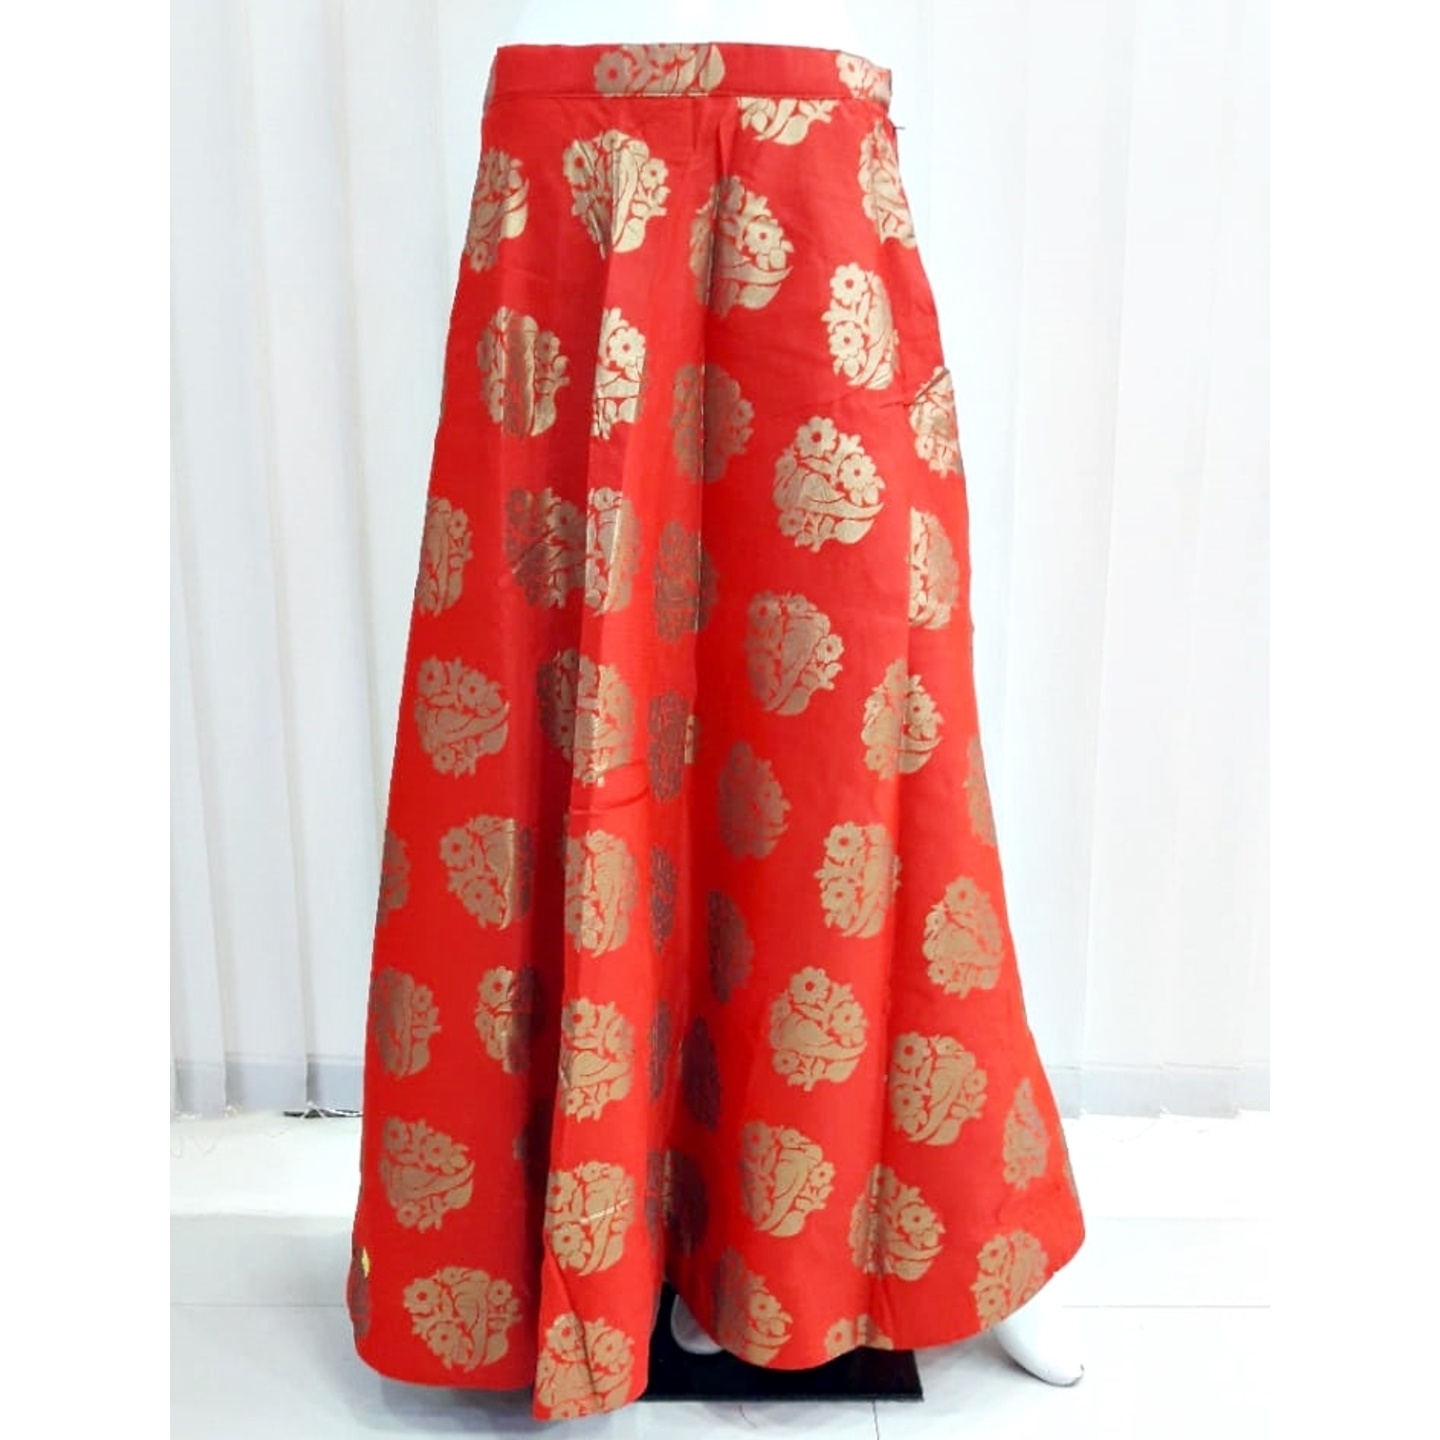 Fusion Skirt - Red Floral